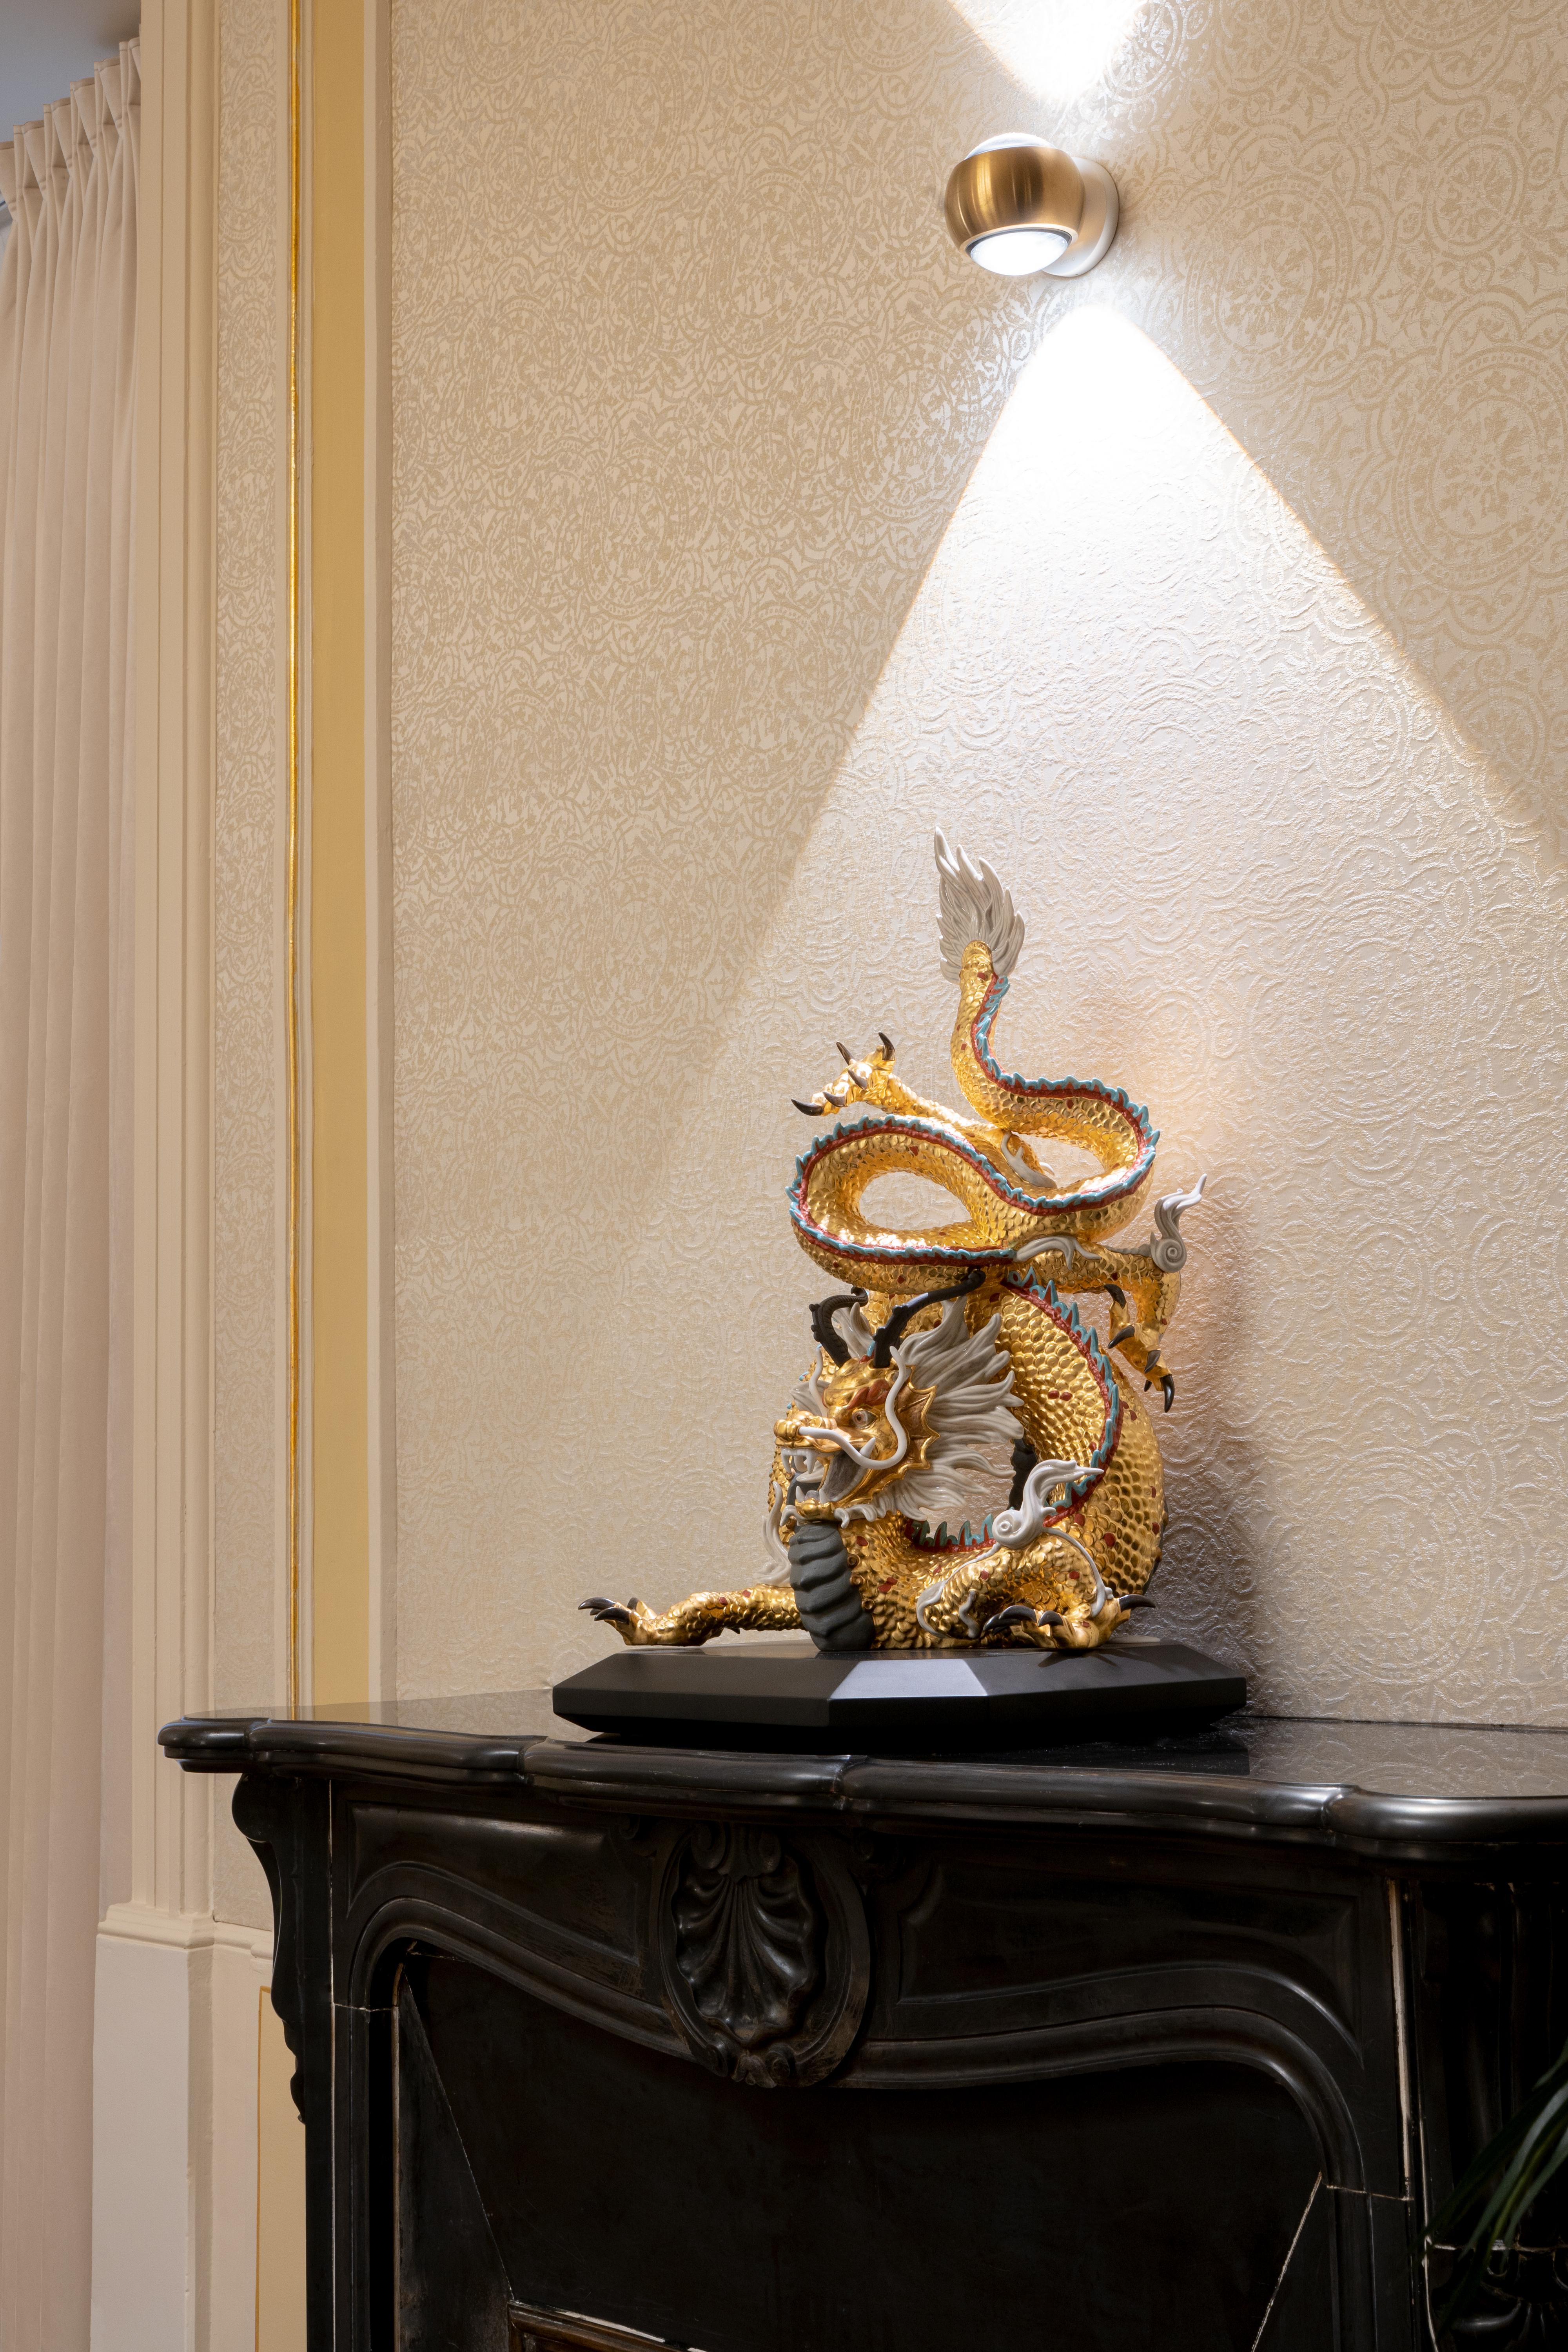 Limited edition High Porcelain sculpture of a dragon, the symbol of power and good fortune in Asian cultures, in a special version to commemorate Lladró’s 70th anniversary. A representation of its supreme power over all creatures in oriental